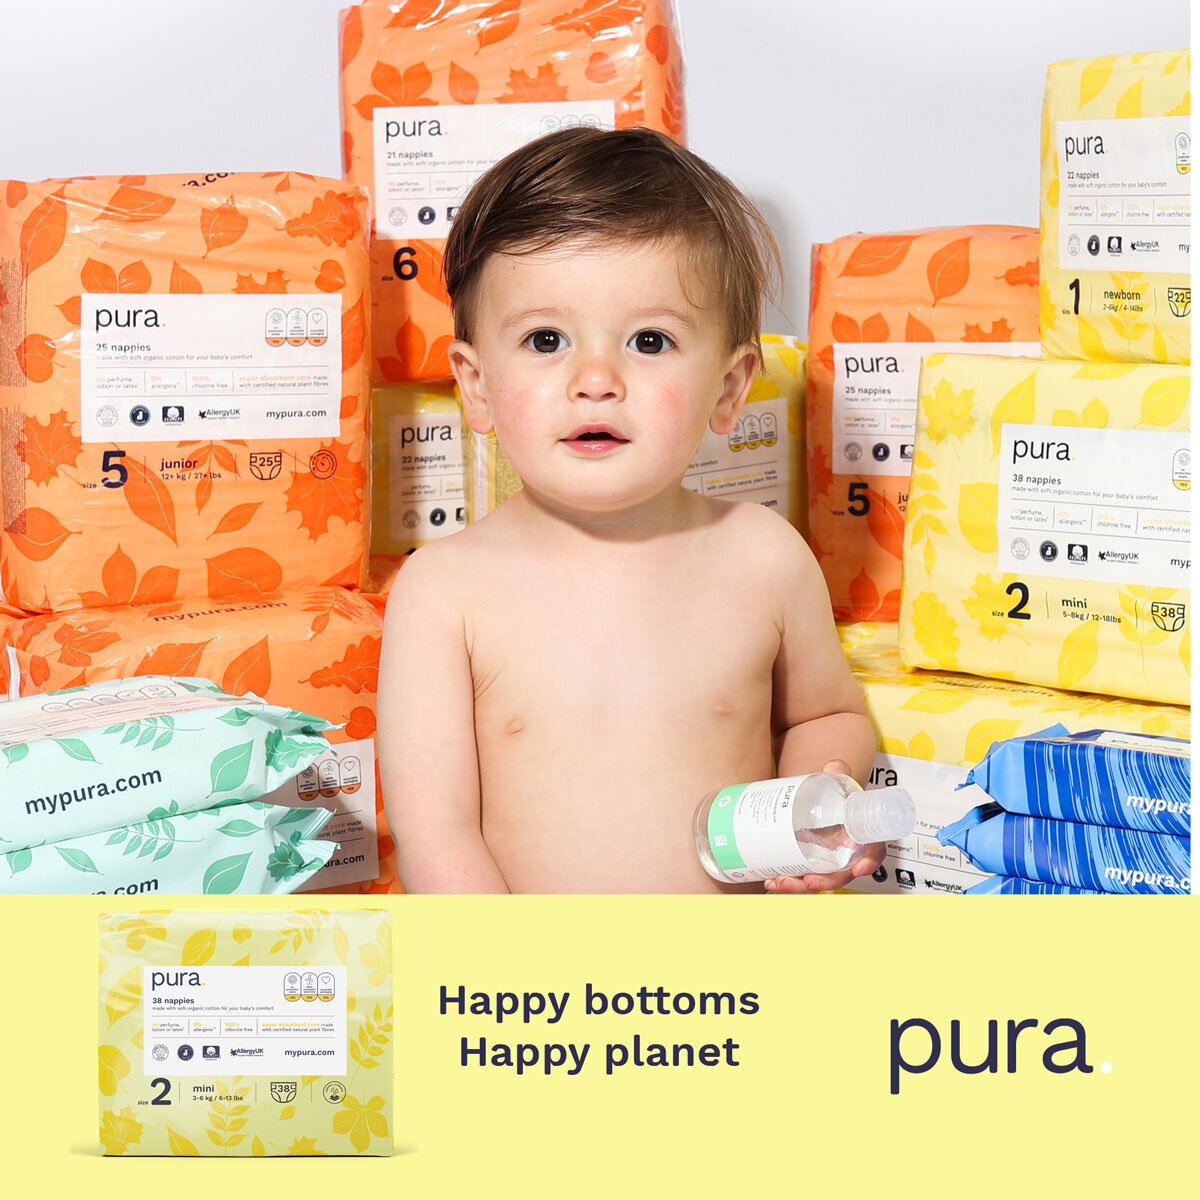 Baby Sitting With Pura Nappy Packs